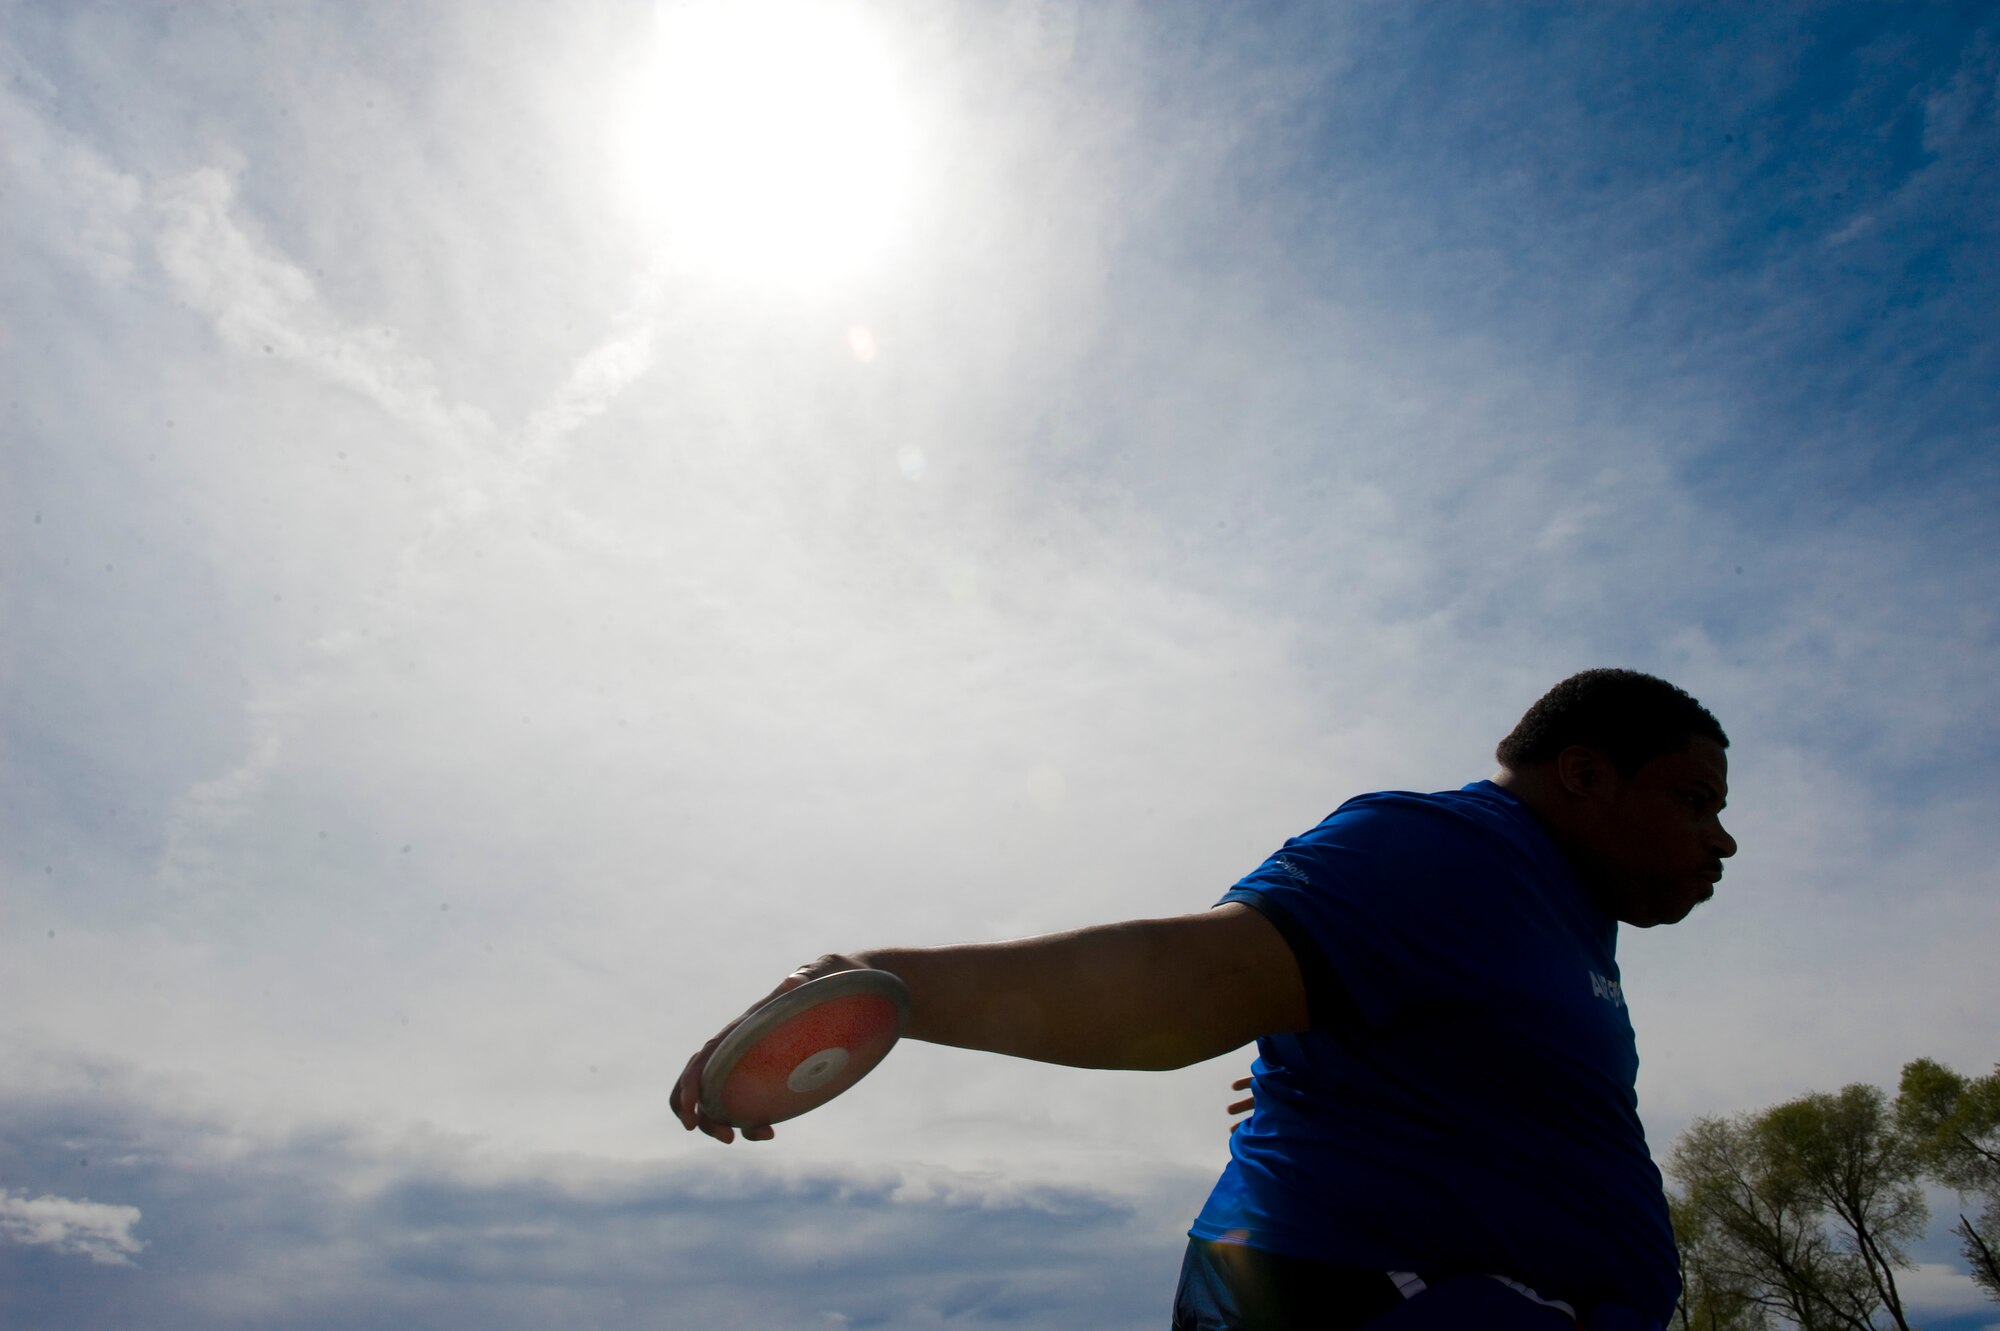 Air Force athlete Timothy Anderson throws a discus during the track and field competition May 17, 2011, at the 2011 Warrior Games in Colorado Springs, Colo.  The track and field events kicked off the games, which continue throughout the week. (U.S. Air Force photo/Staff Sergeant Christopher Griffin.)